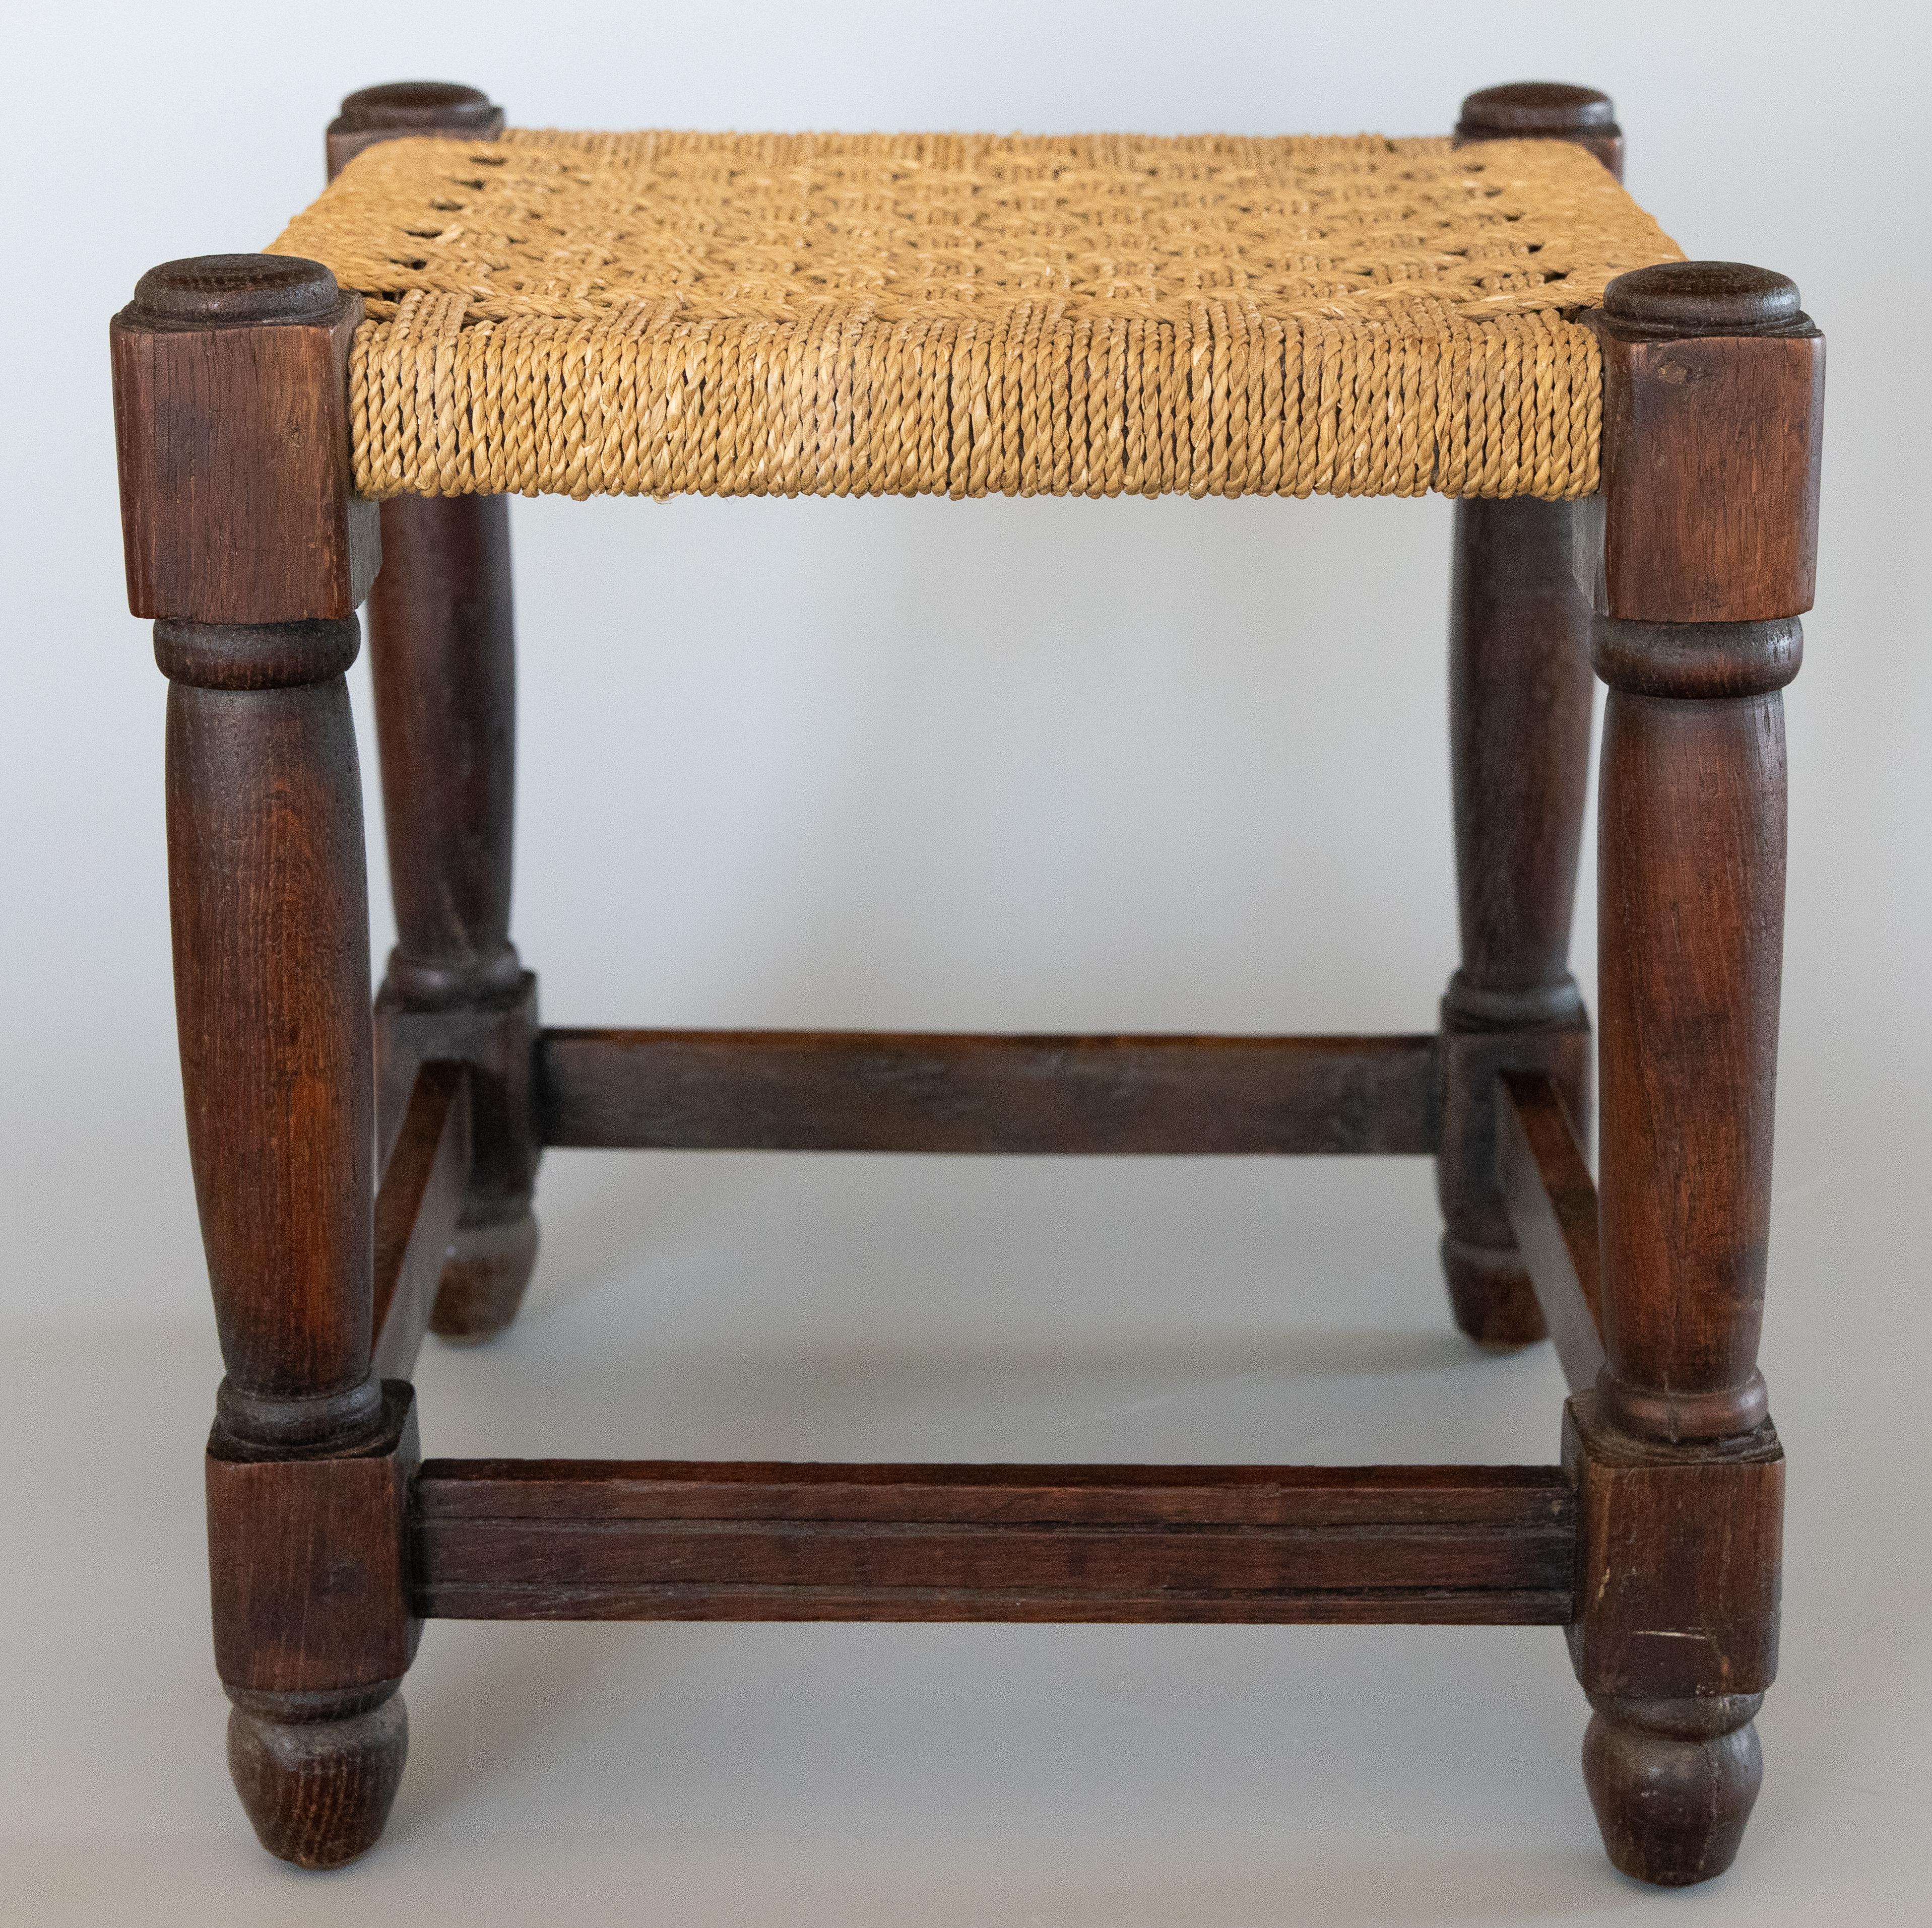 Edwardian Antique English Oak Woven Cord Rope Stool Footstool, circa 1900 For Sale